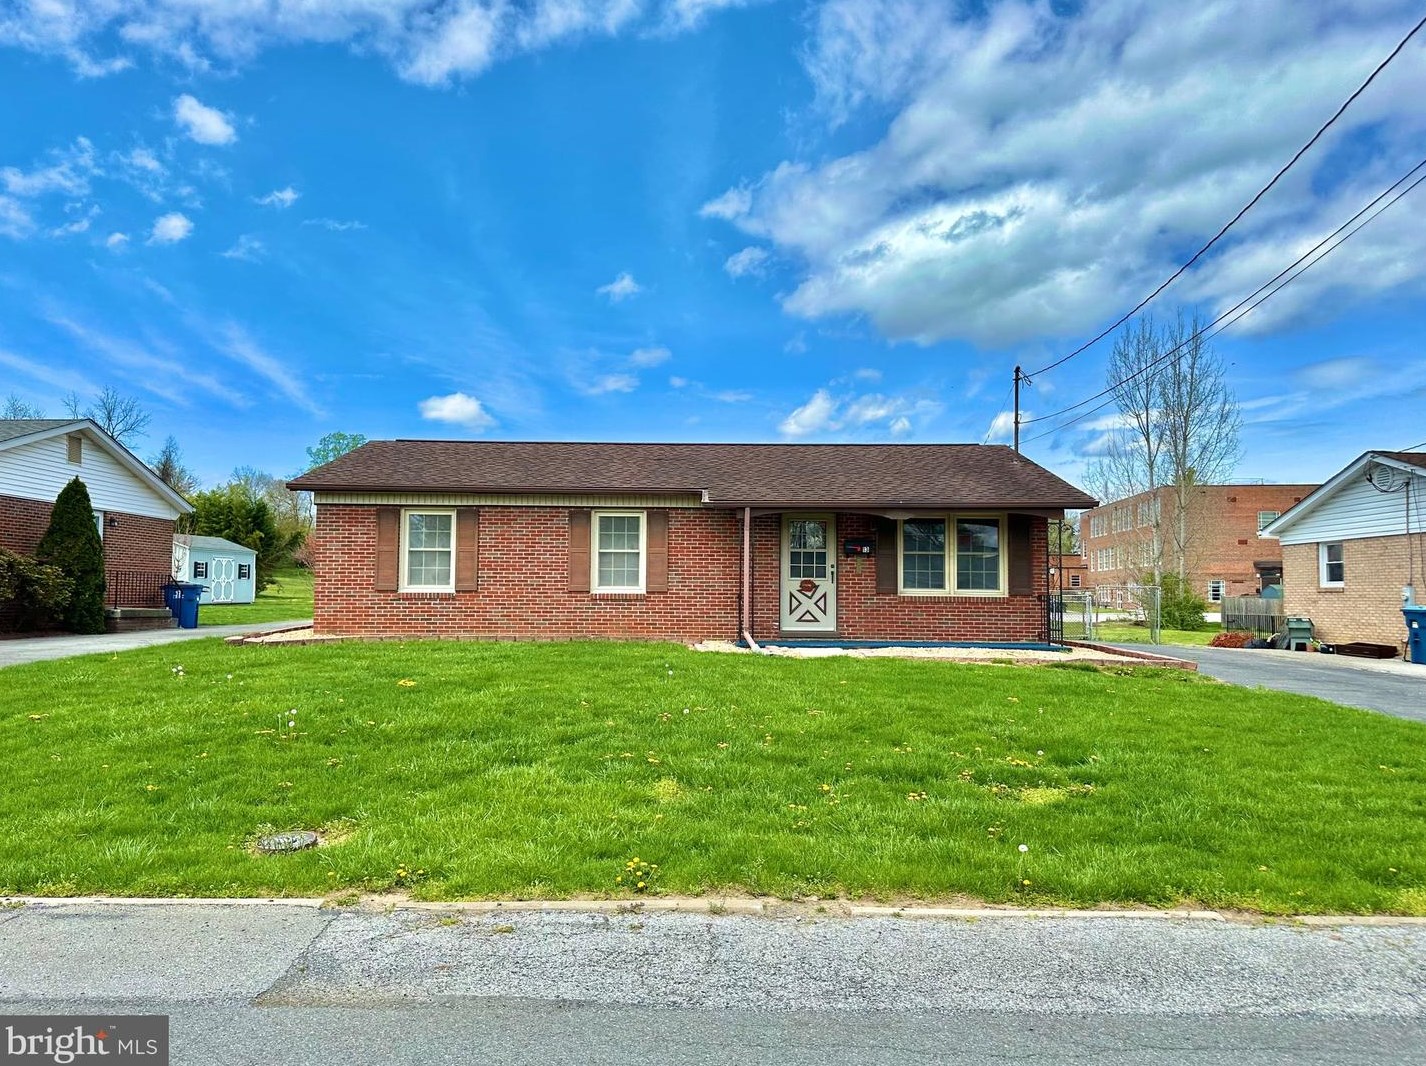 13 Lincoln Ave, Mount Weather, VA 22611